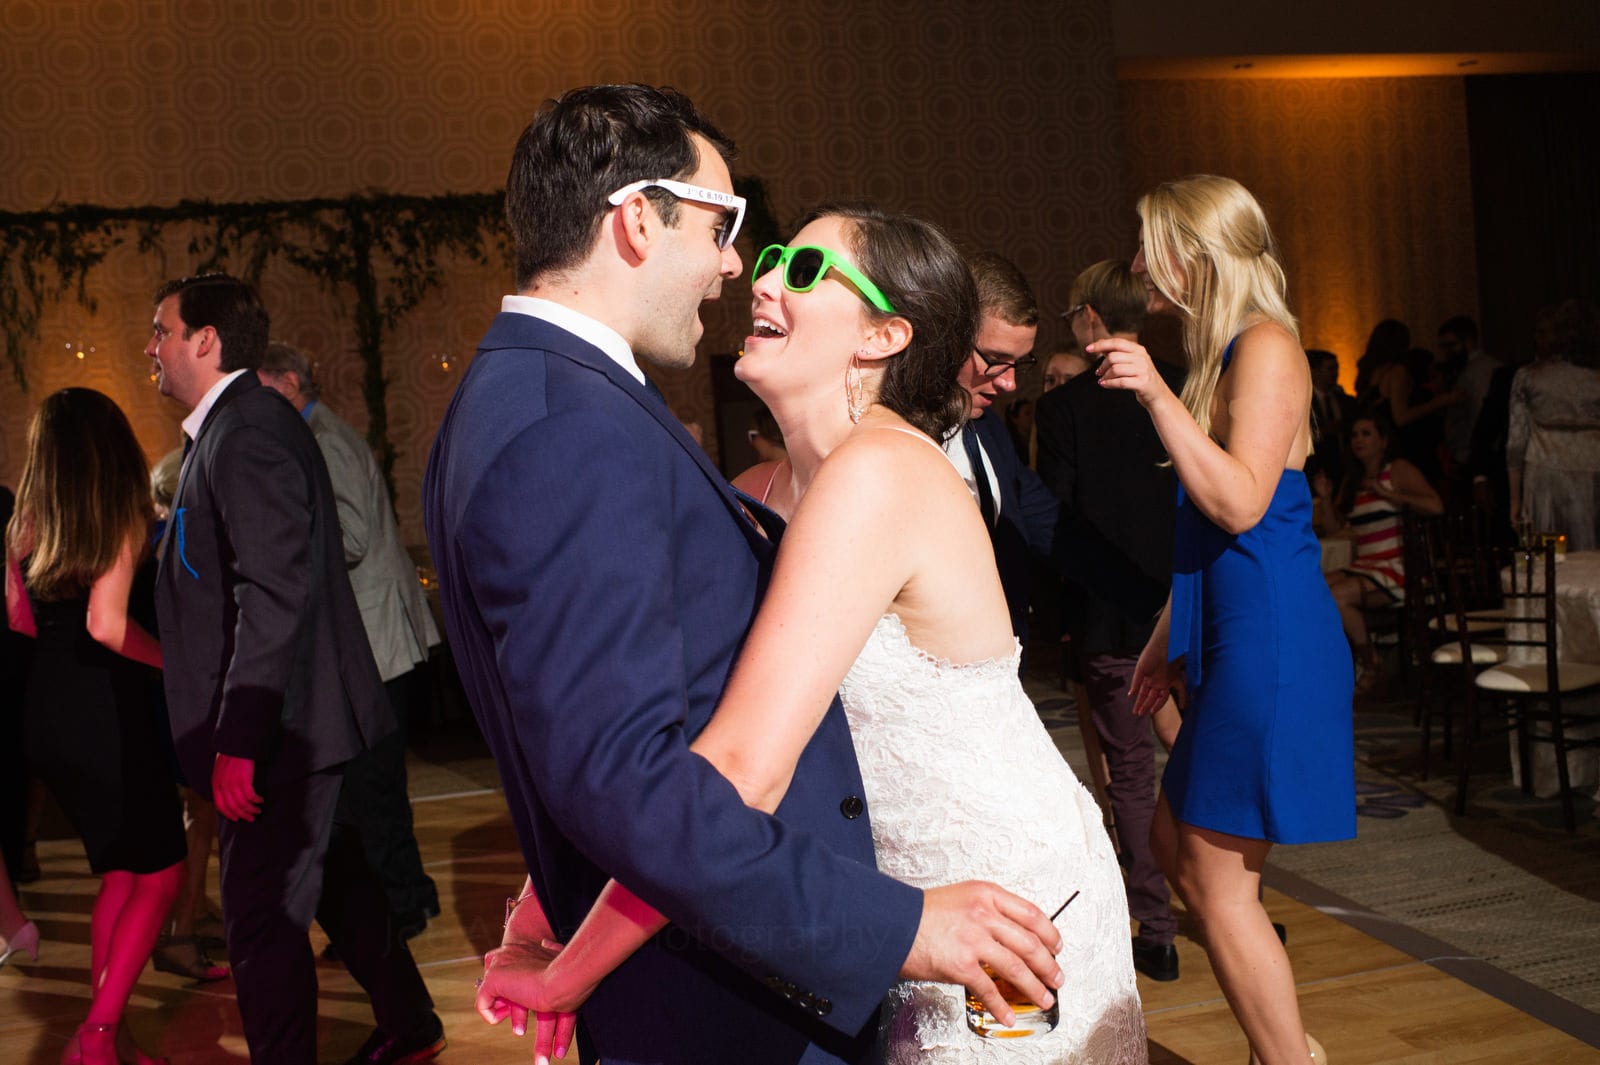 A bride and groom wearing sunglasses embrace on the dance floor of their Wedding Photography at Fairmont Hotel Pittsburgh.